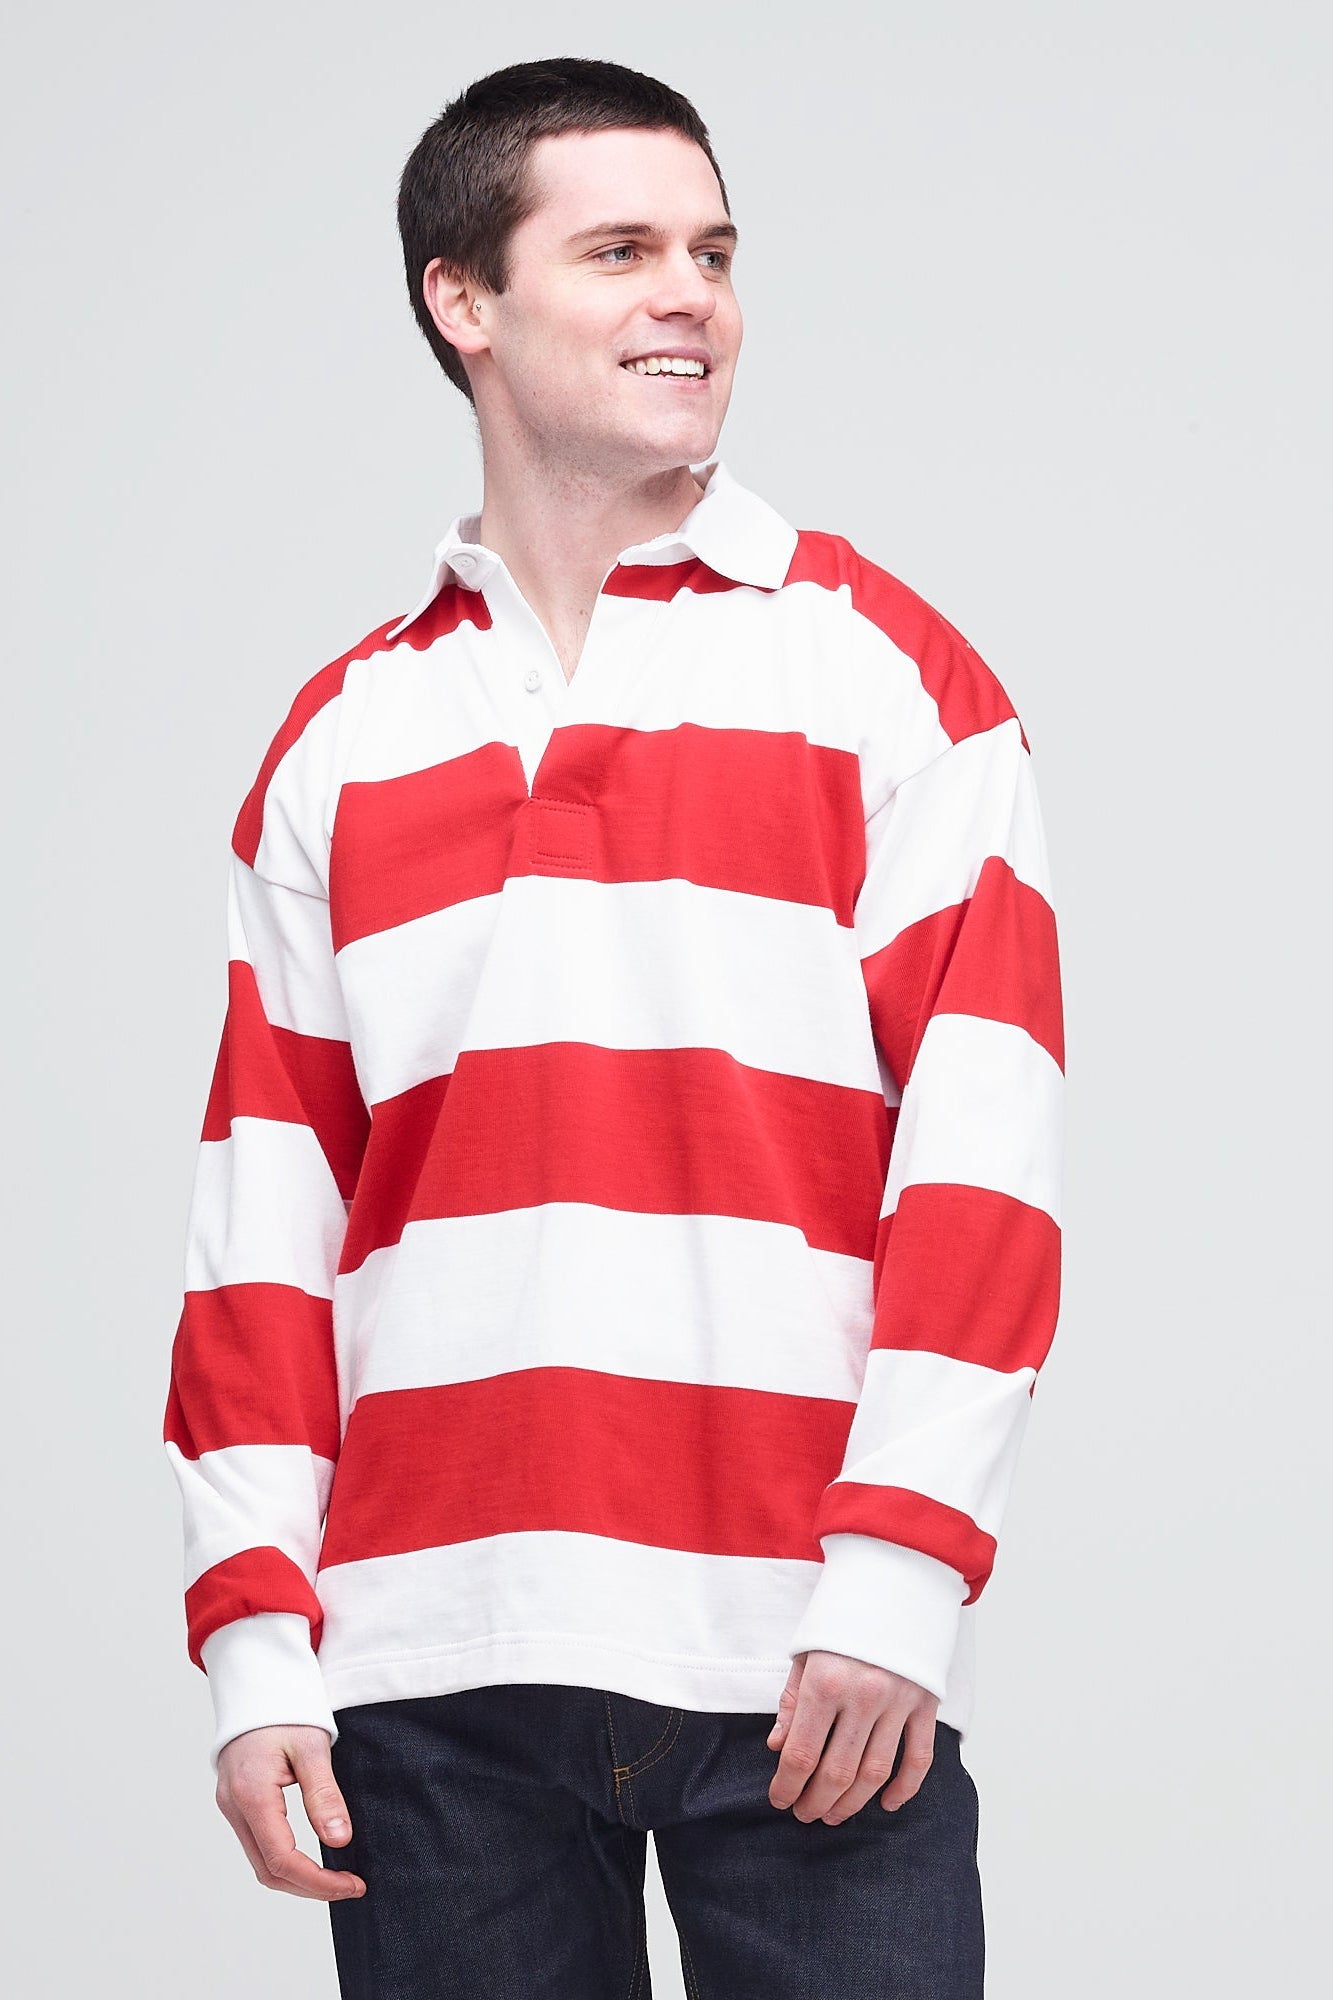      Male_Wide-Stripped-Rugby-Shirt_Red-White_Front